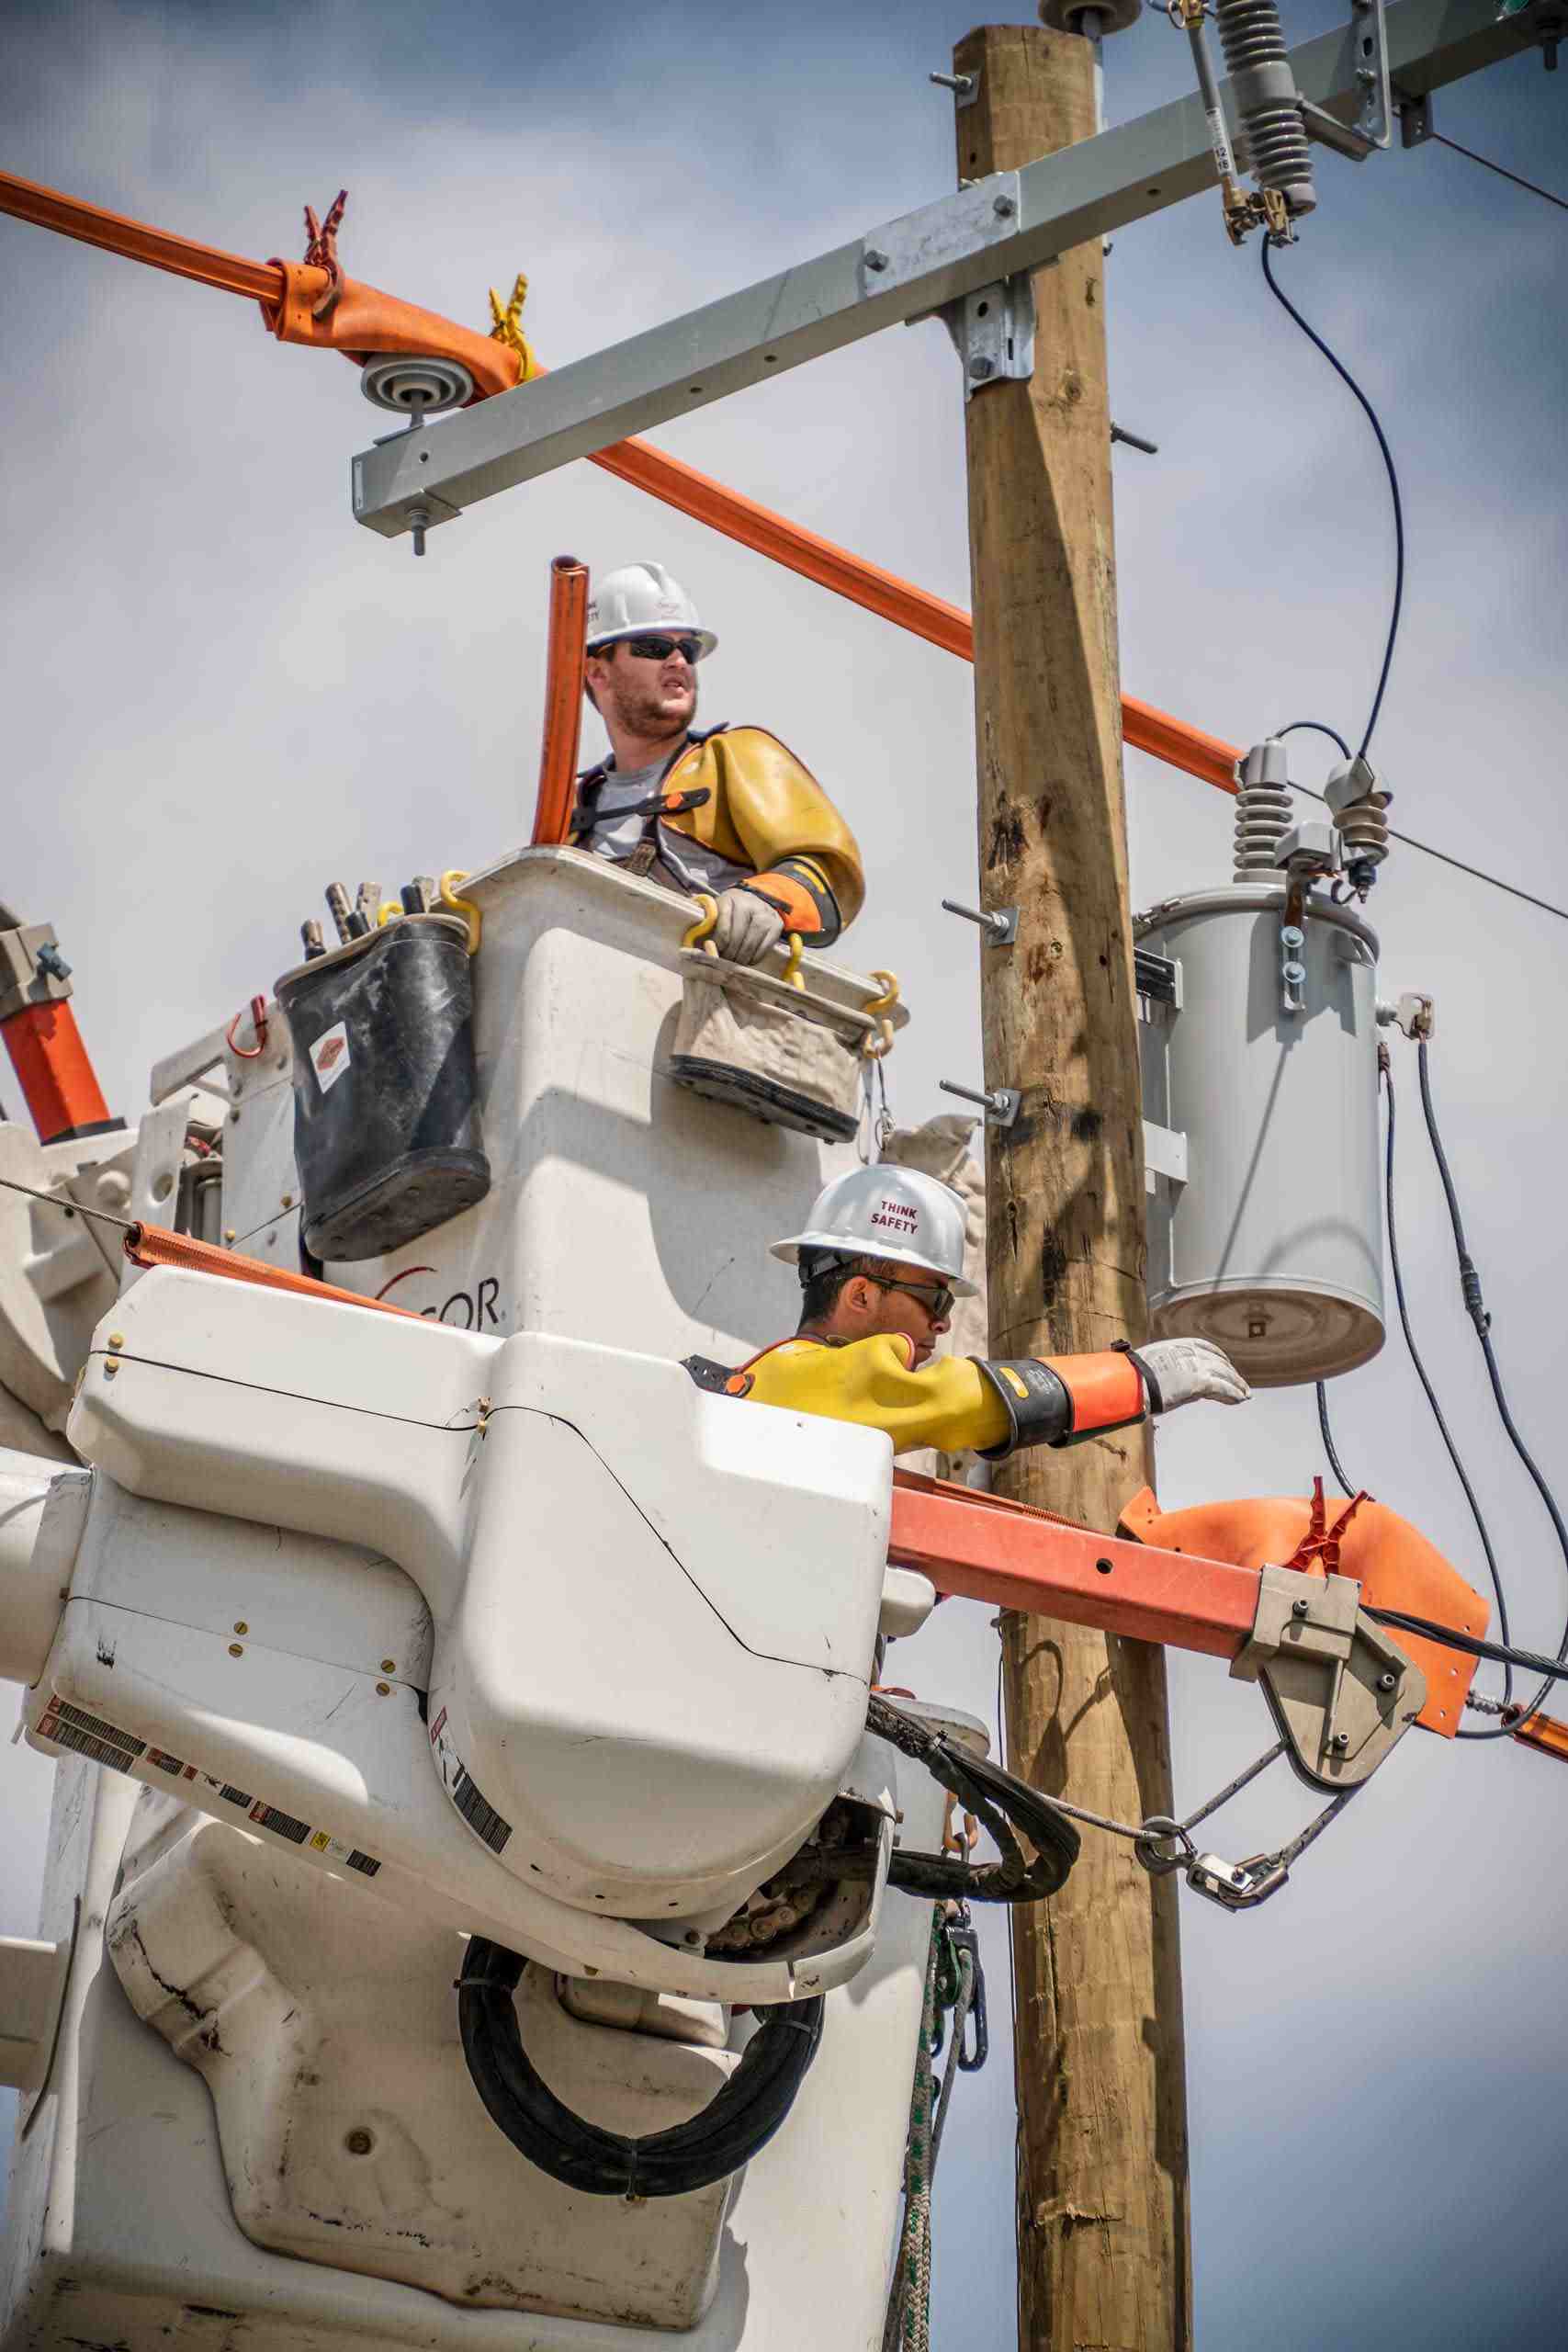 Power Restored: Dedicated Oncor Linemen Bringing Electricity Back to the Grid